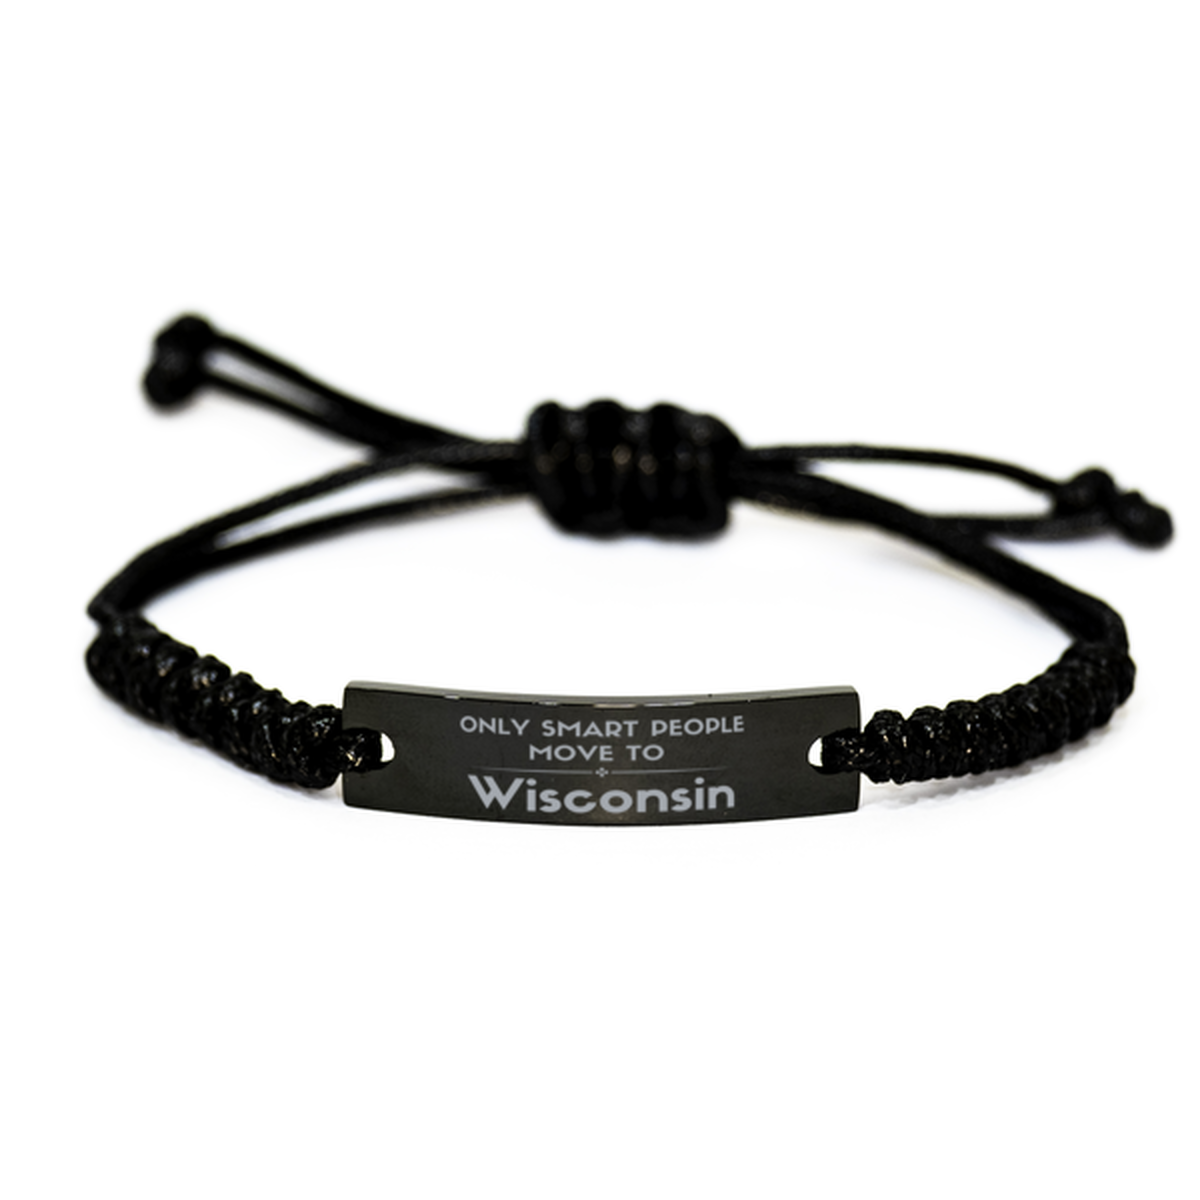 Only smart people move to Wisconsin Black Rope Bracelet, Gag Gifts For Wisconsin, Move to Wisconsin Gifts for Friends Coworker Funny Saying Quote